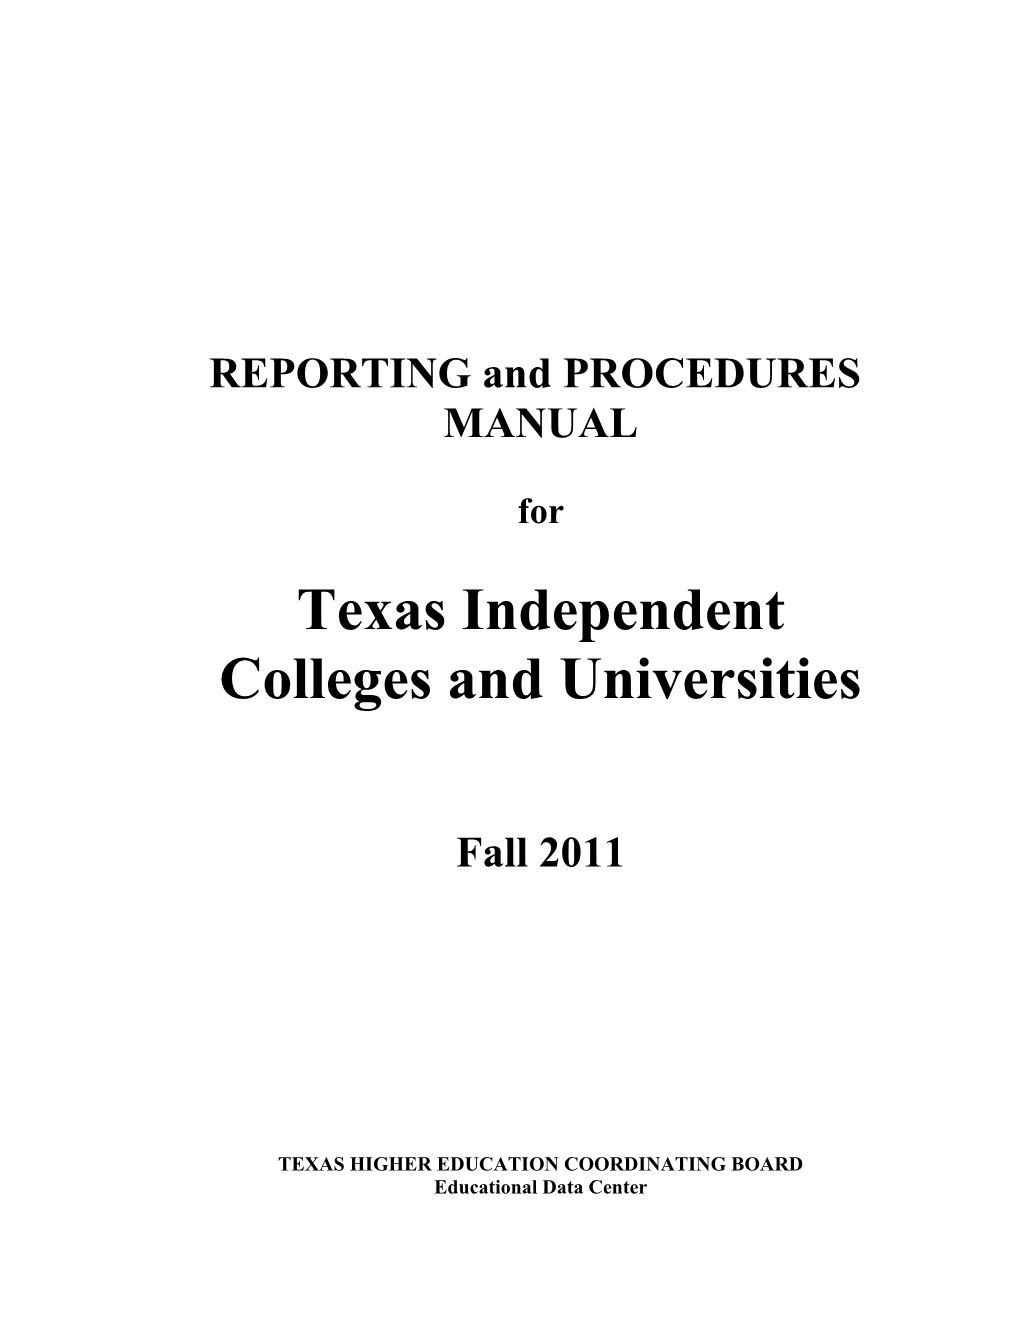 Reporting and Procedures Manual for Texas Independent Colleges and Universities, Fall 2007